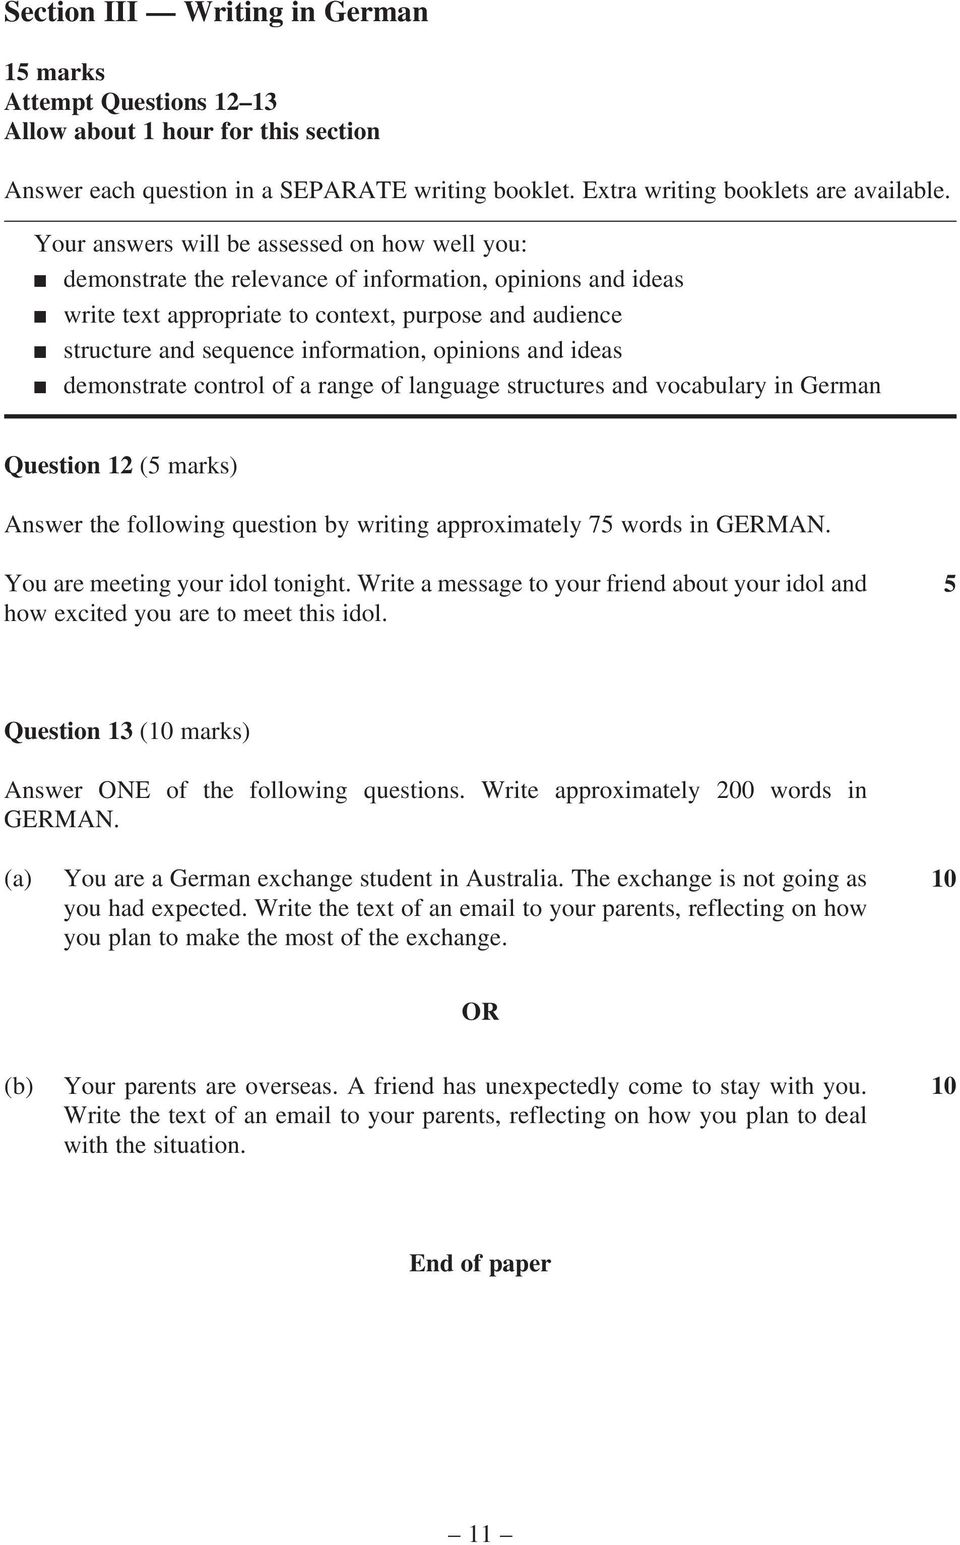 information, opinions and ideas n demonstrate control of a range of language structures and vocabulary in German Question 12 (5 marks) Answer the following question by writing approximately 75 words